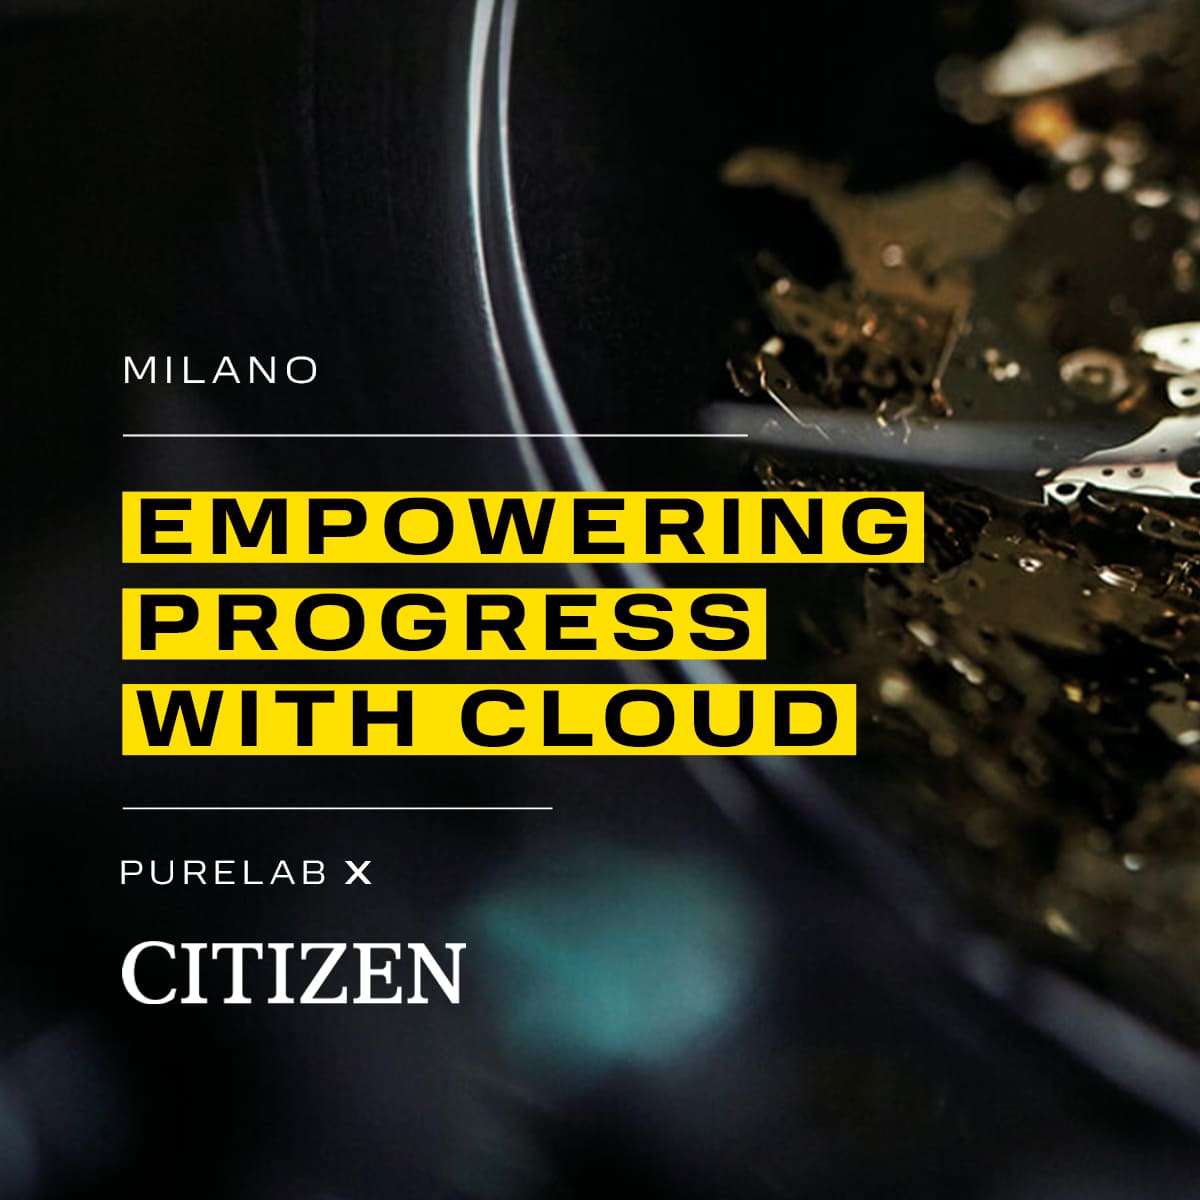 Empowering progress with cloud